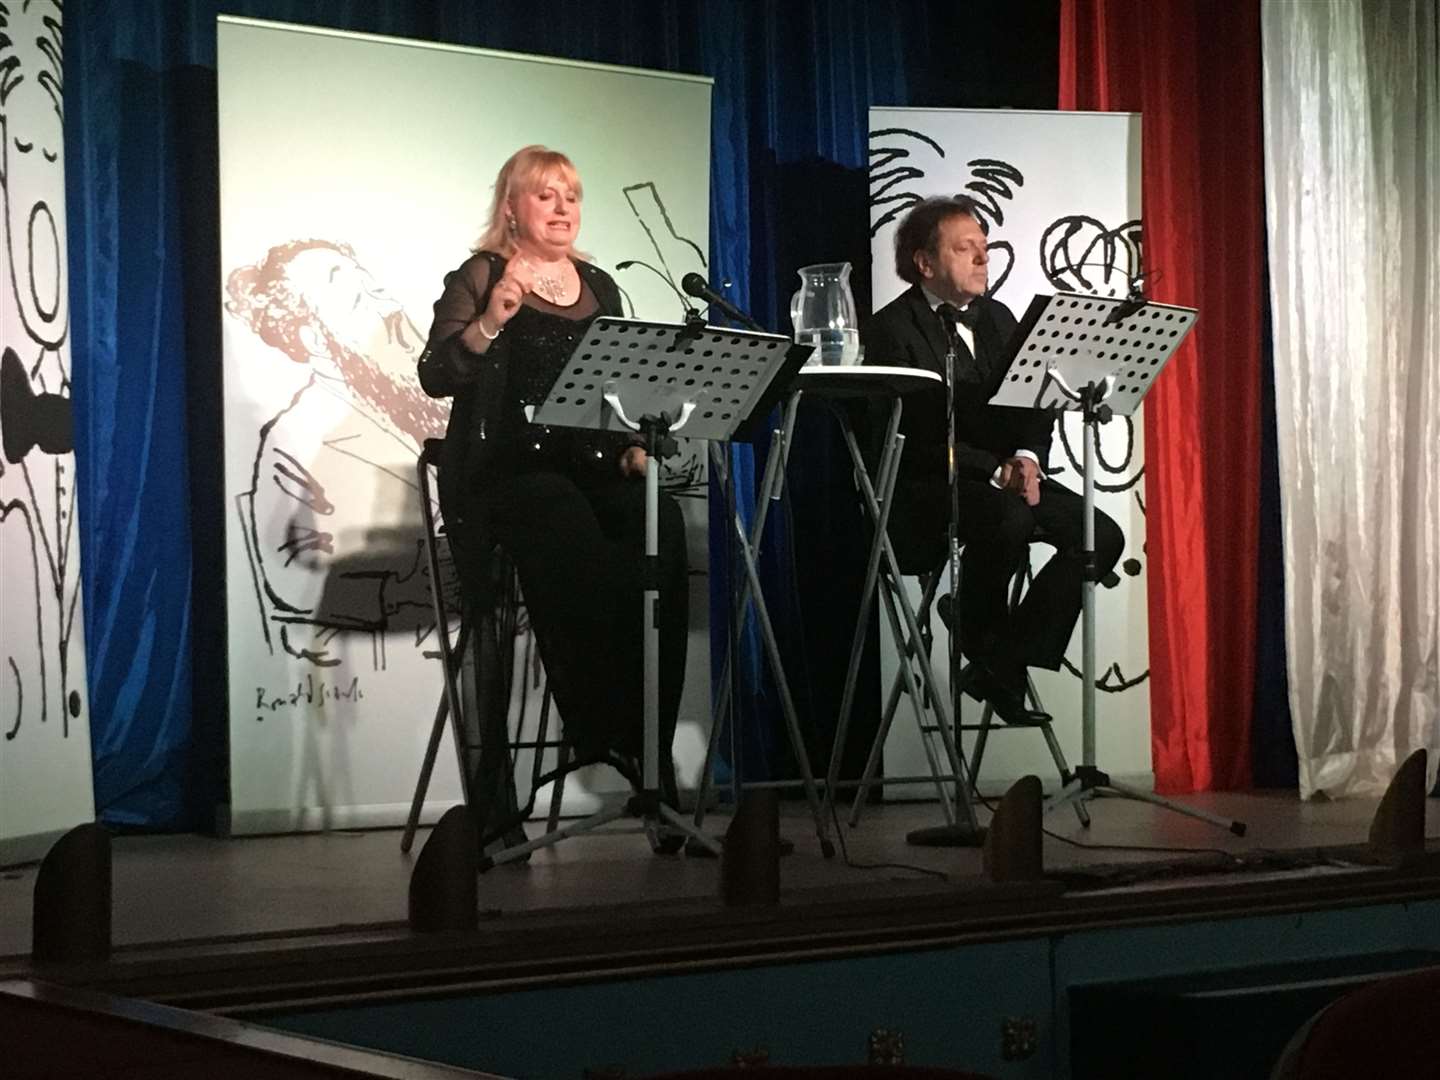 Sovra Newman and Leon Berger presenting a tribute to Flanders and Swan at the Criterion Theatre, Blue Town, Sheppey